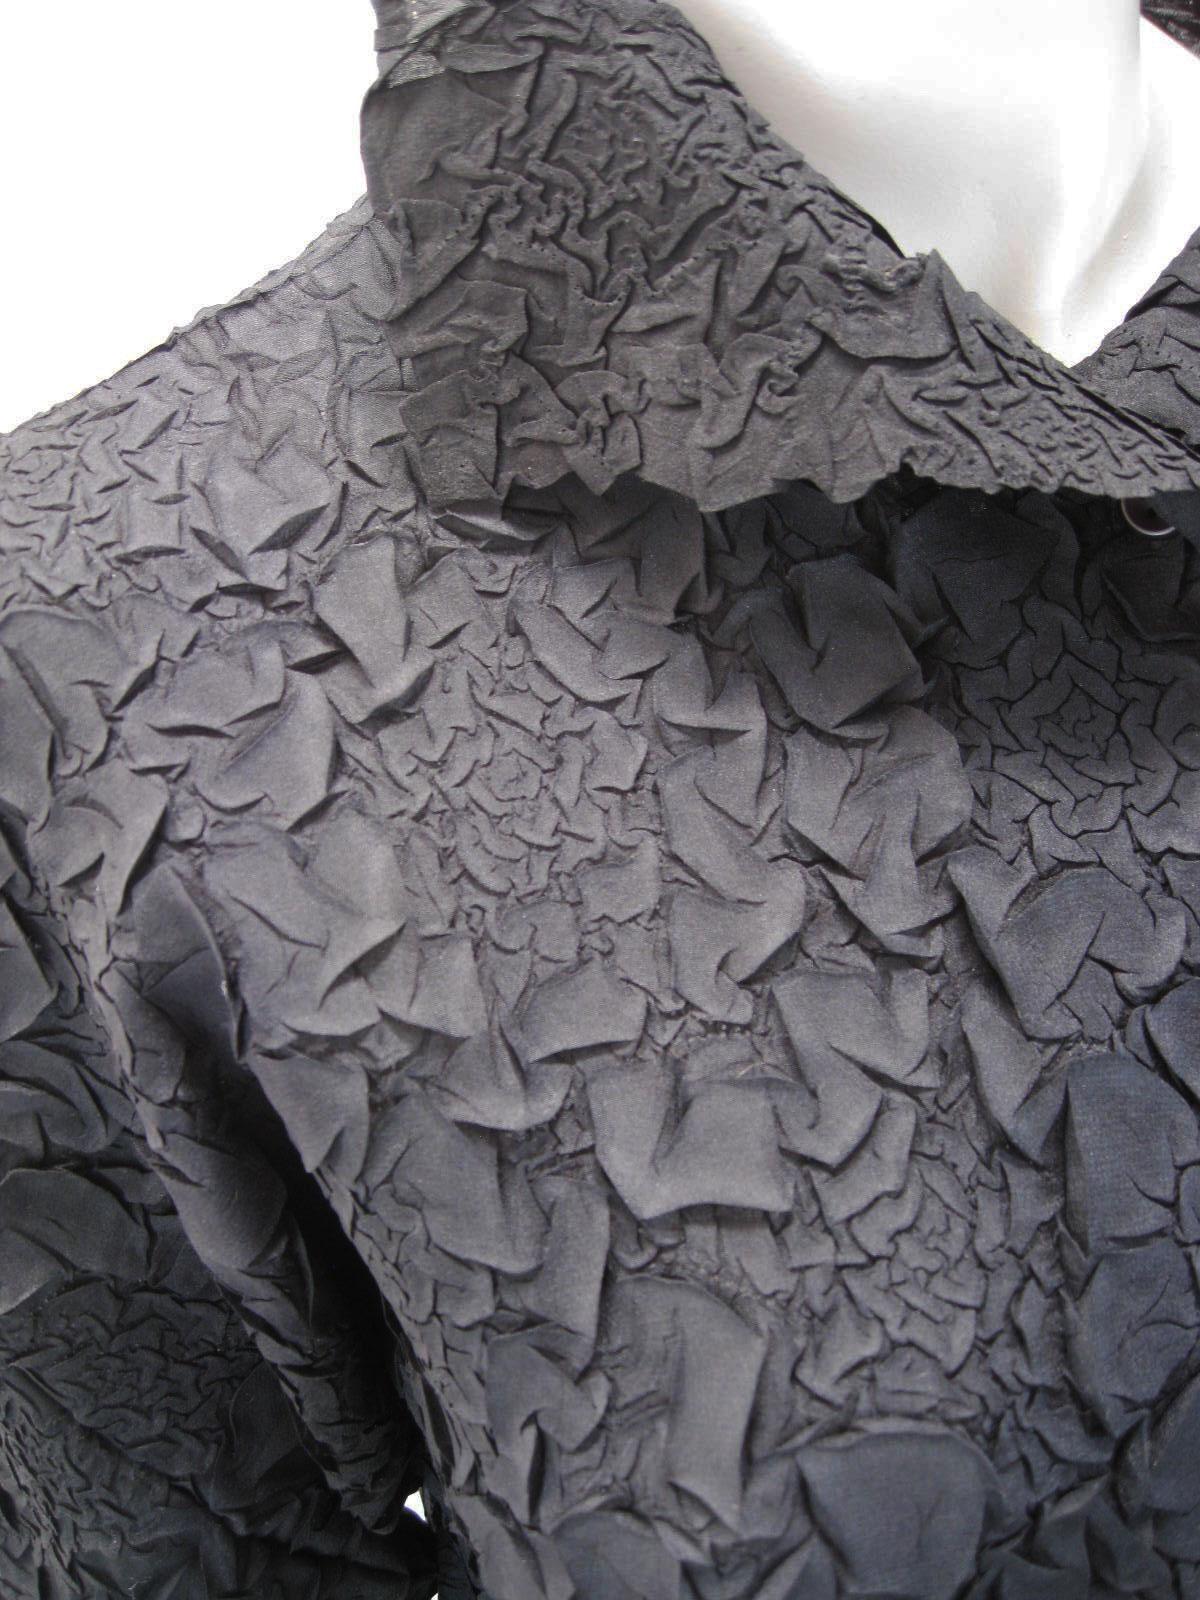 Black textured blouse by Issey Miyake. While somewhat abstract, I feel this denotes a floral pattern.

Crinkled texture with lots of stretch.

Button down with stand up/fold over collar.

Fabric is Polyester.

Marked size 2.

This item is in